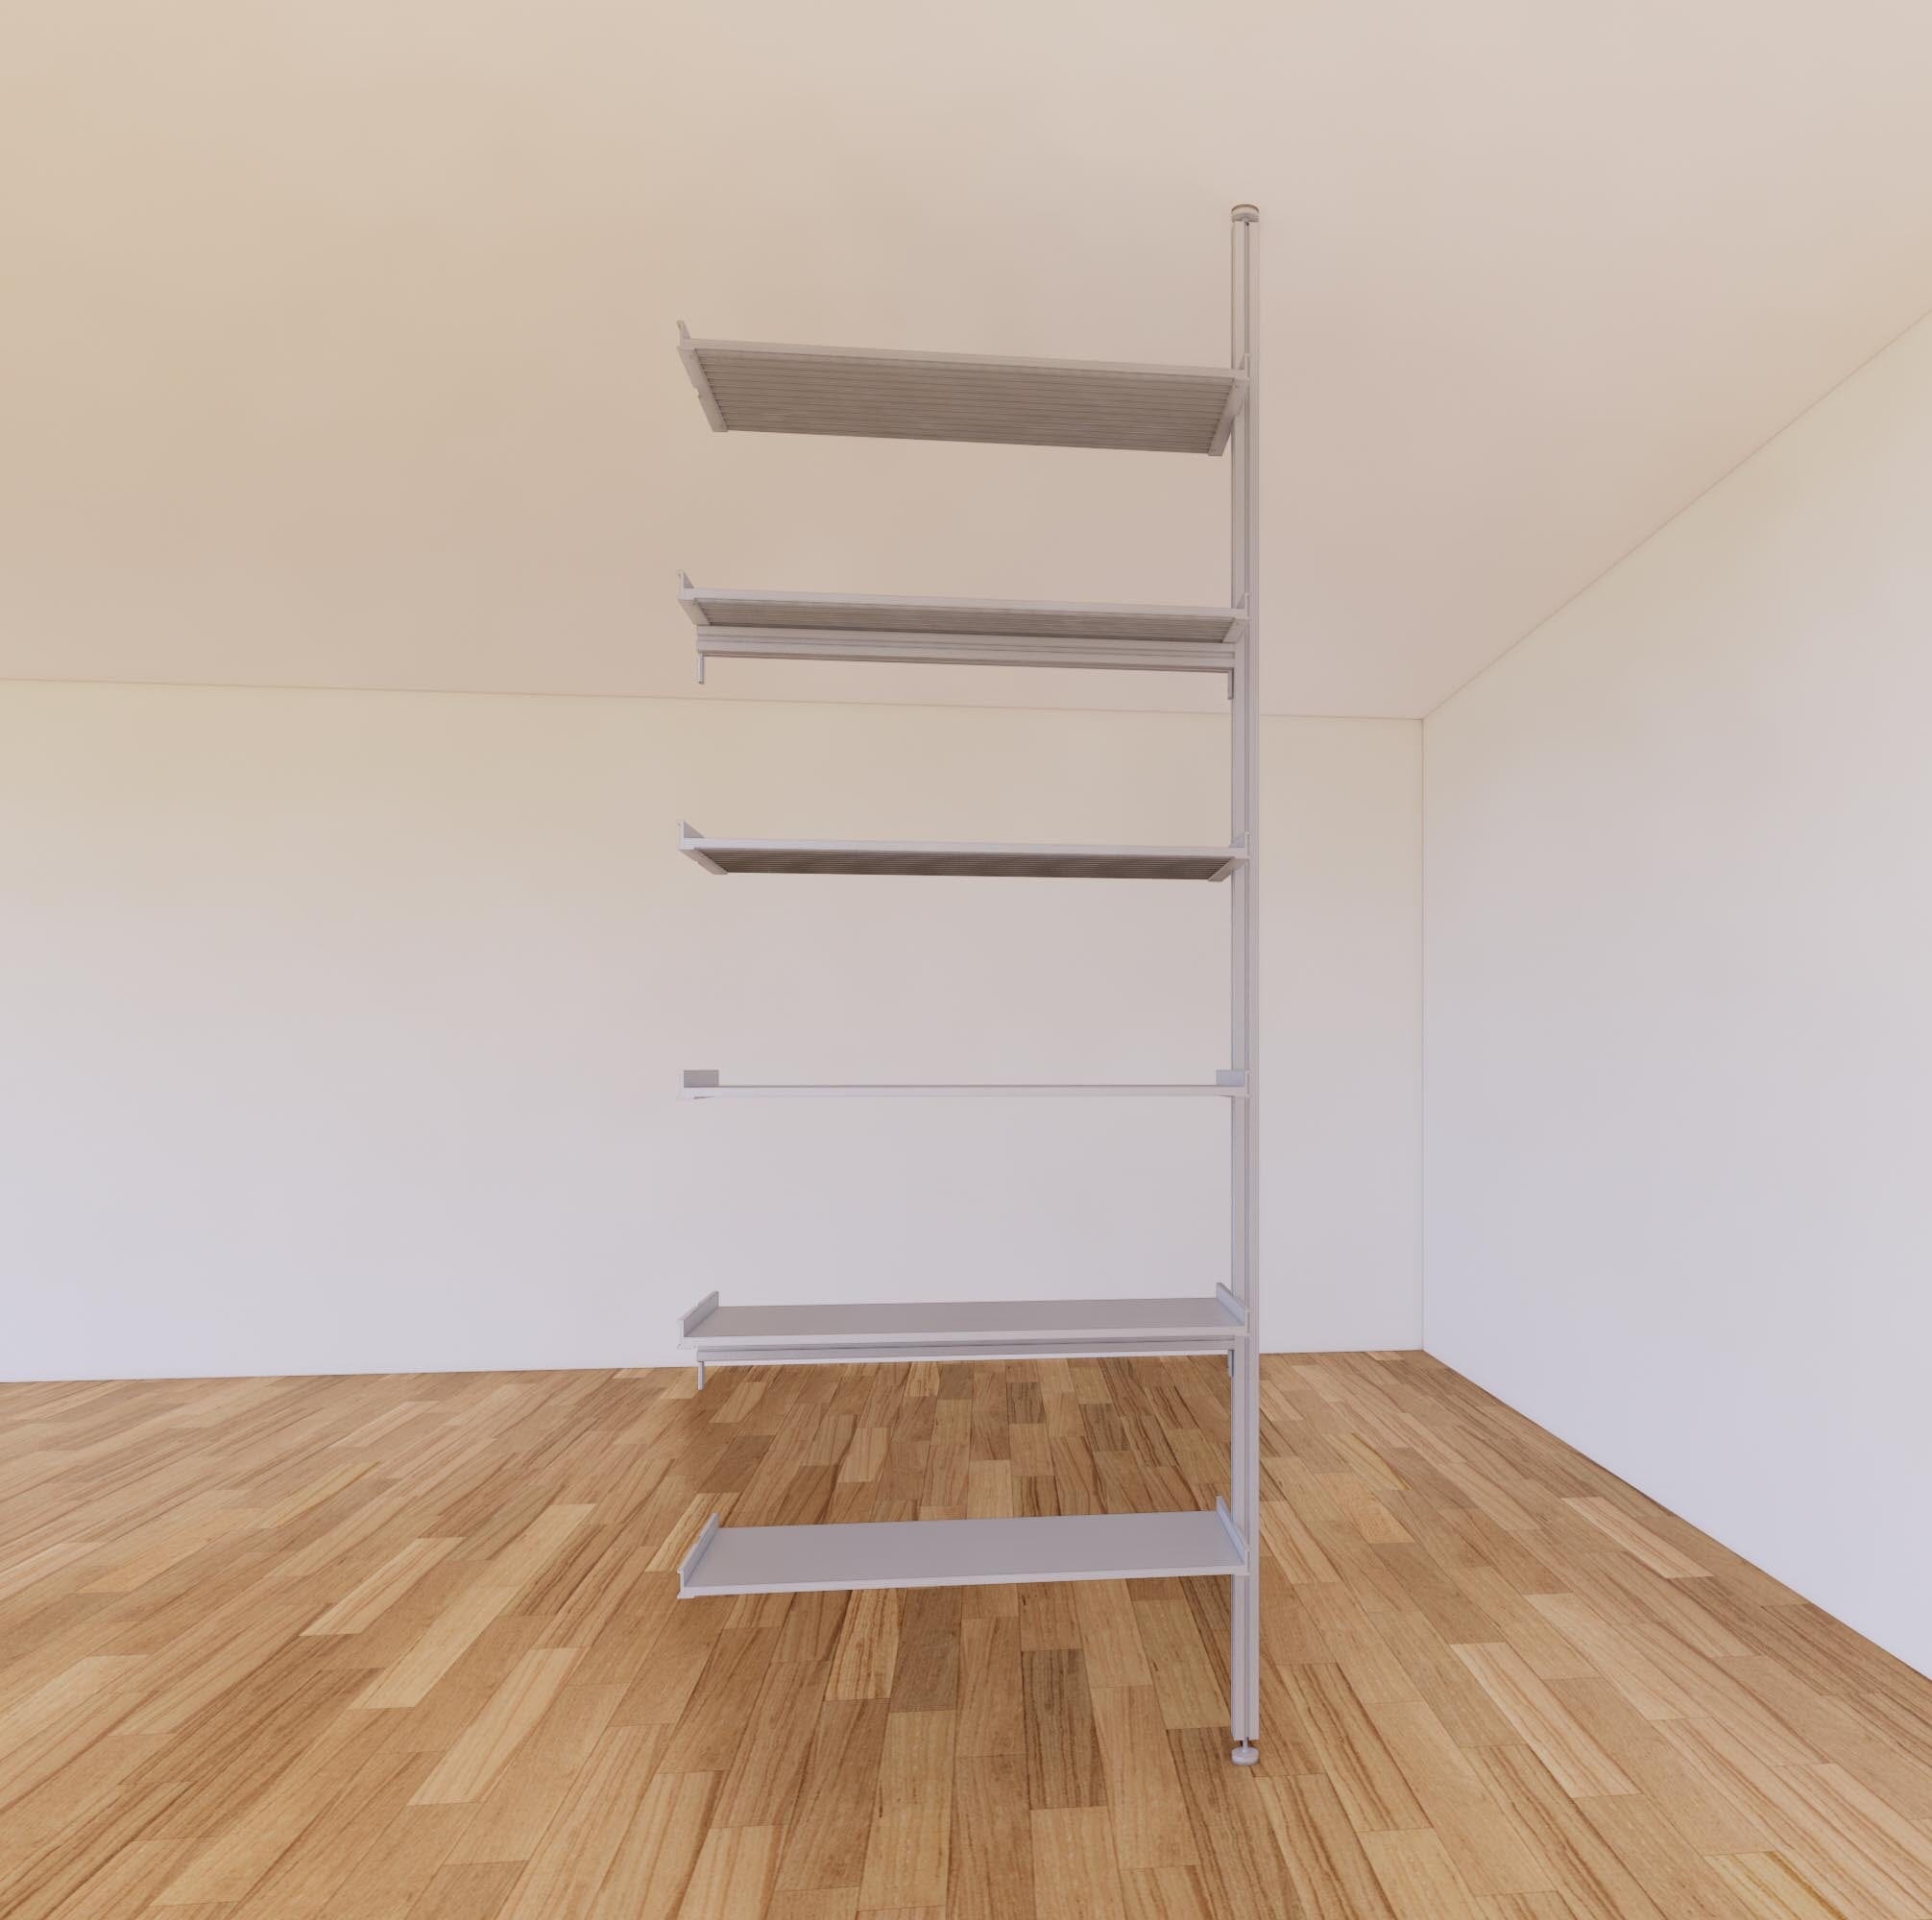 Floor to Ceiling Room Divider Shelving